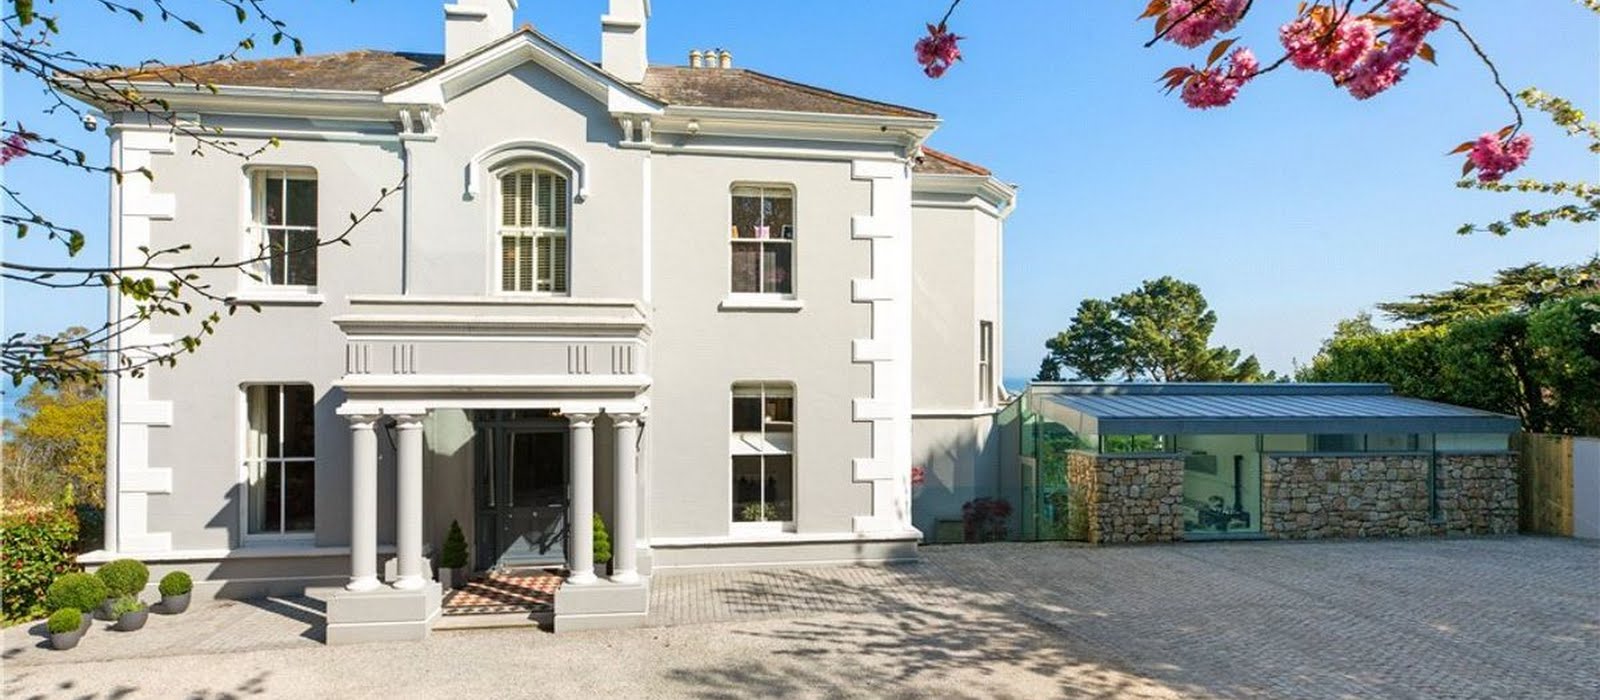 With a swimming pool, wine cellar, gym and sea views, this Killiney home is on sale for €5.95 million